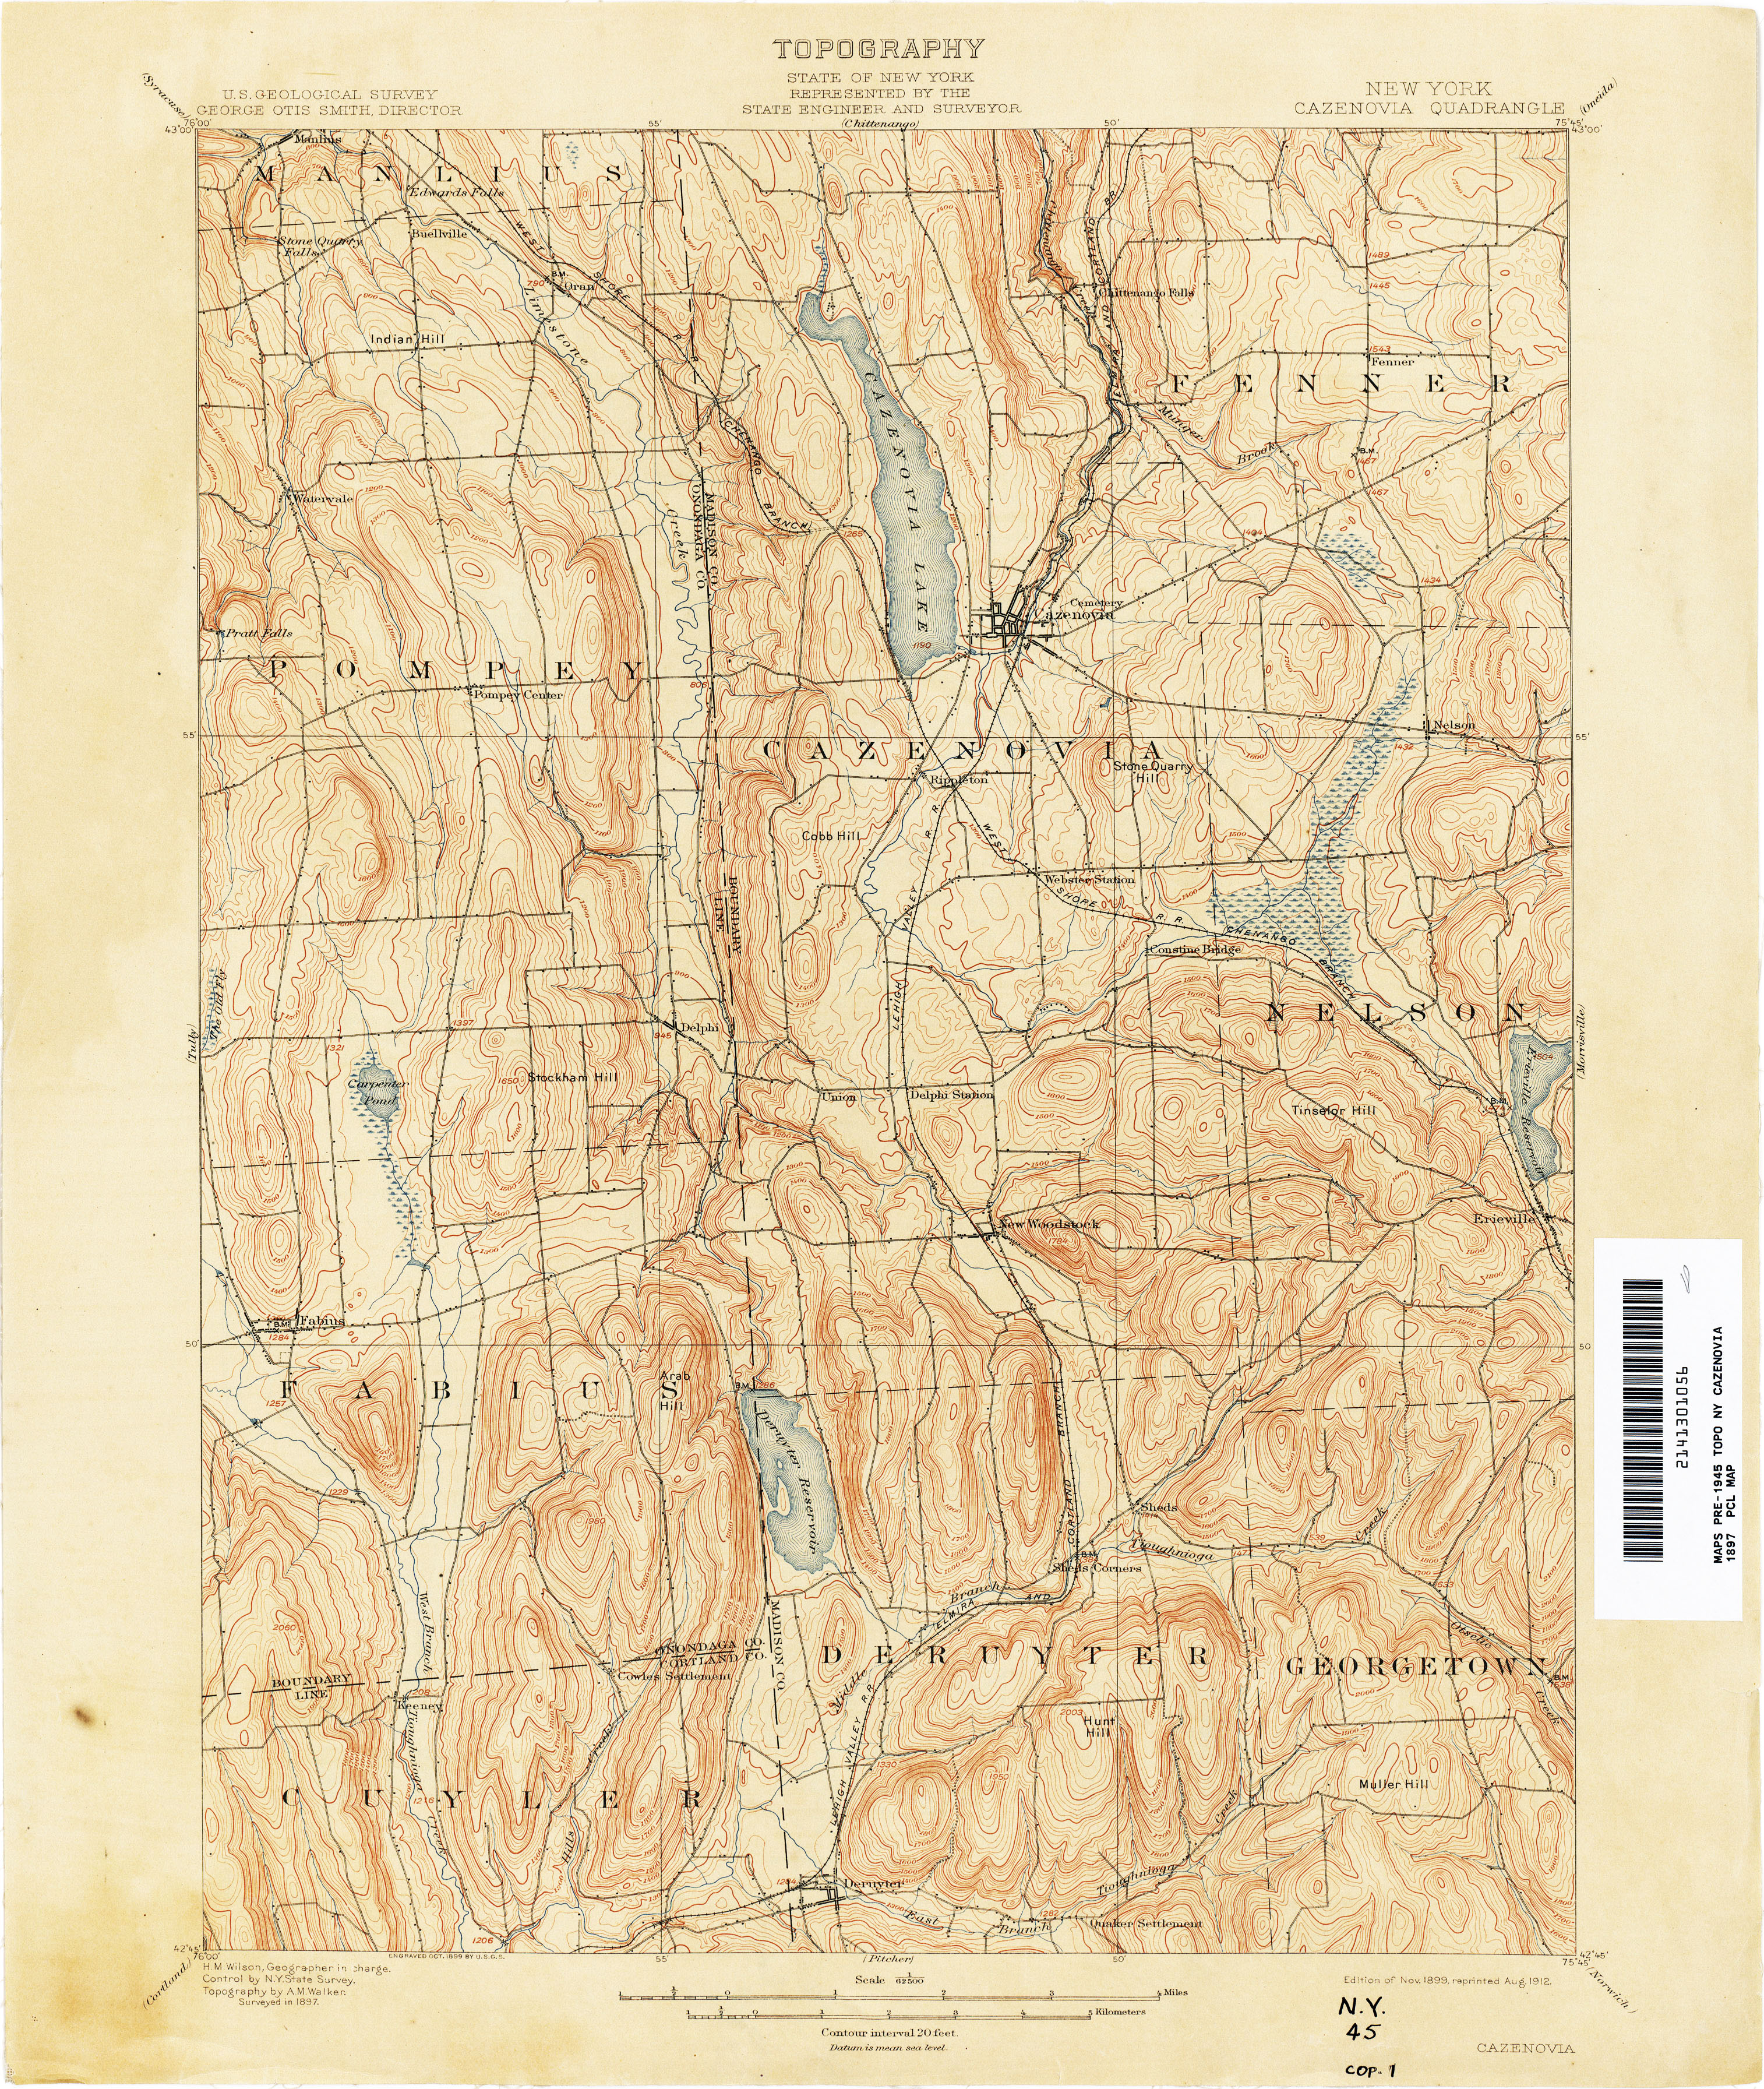 Image Trader Clinton County New York USGS Topographic Maps on CD 